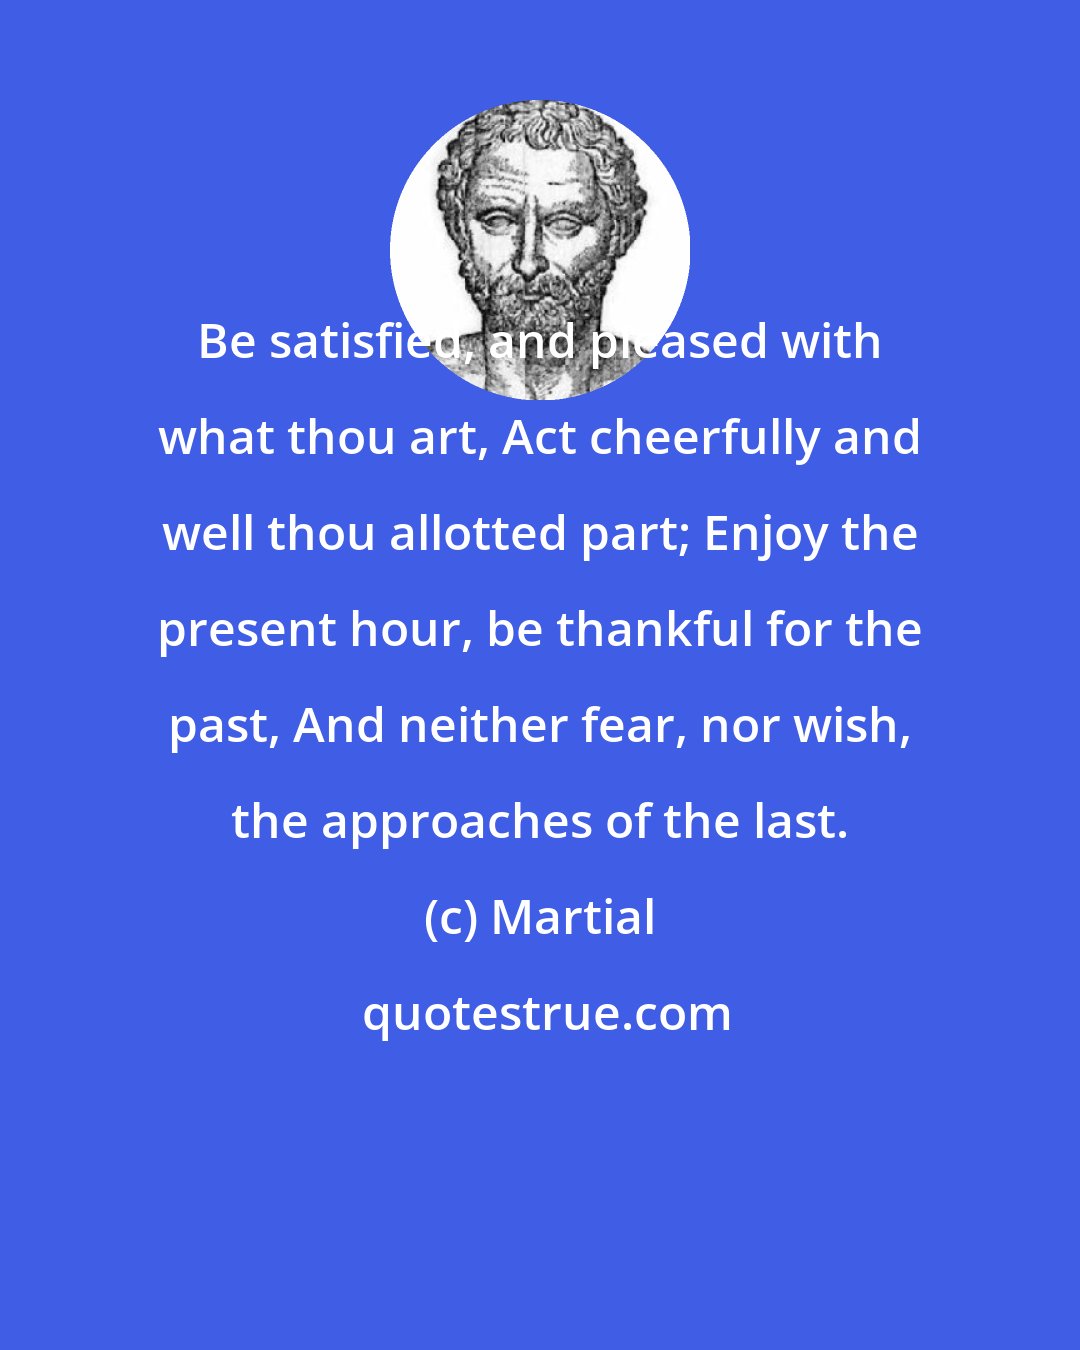 Martial: Be satisfied, and pleased with what thou art, Act cheerfully and well thou allotted part; Enjoy the present hour, be thankful for the past, And neither fear, nor wish, the approaches of the last.